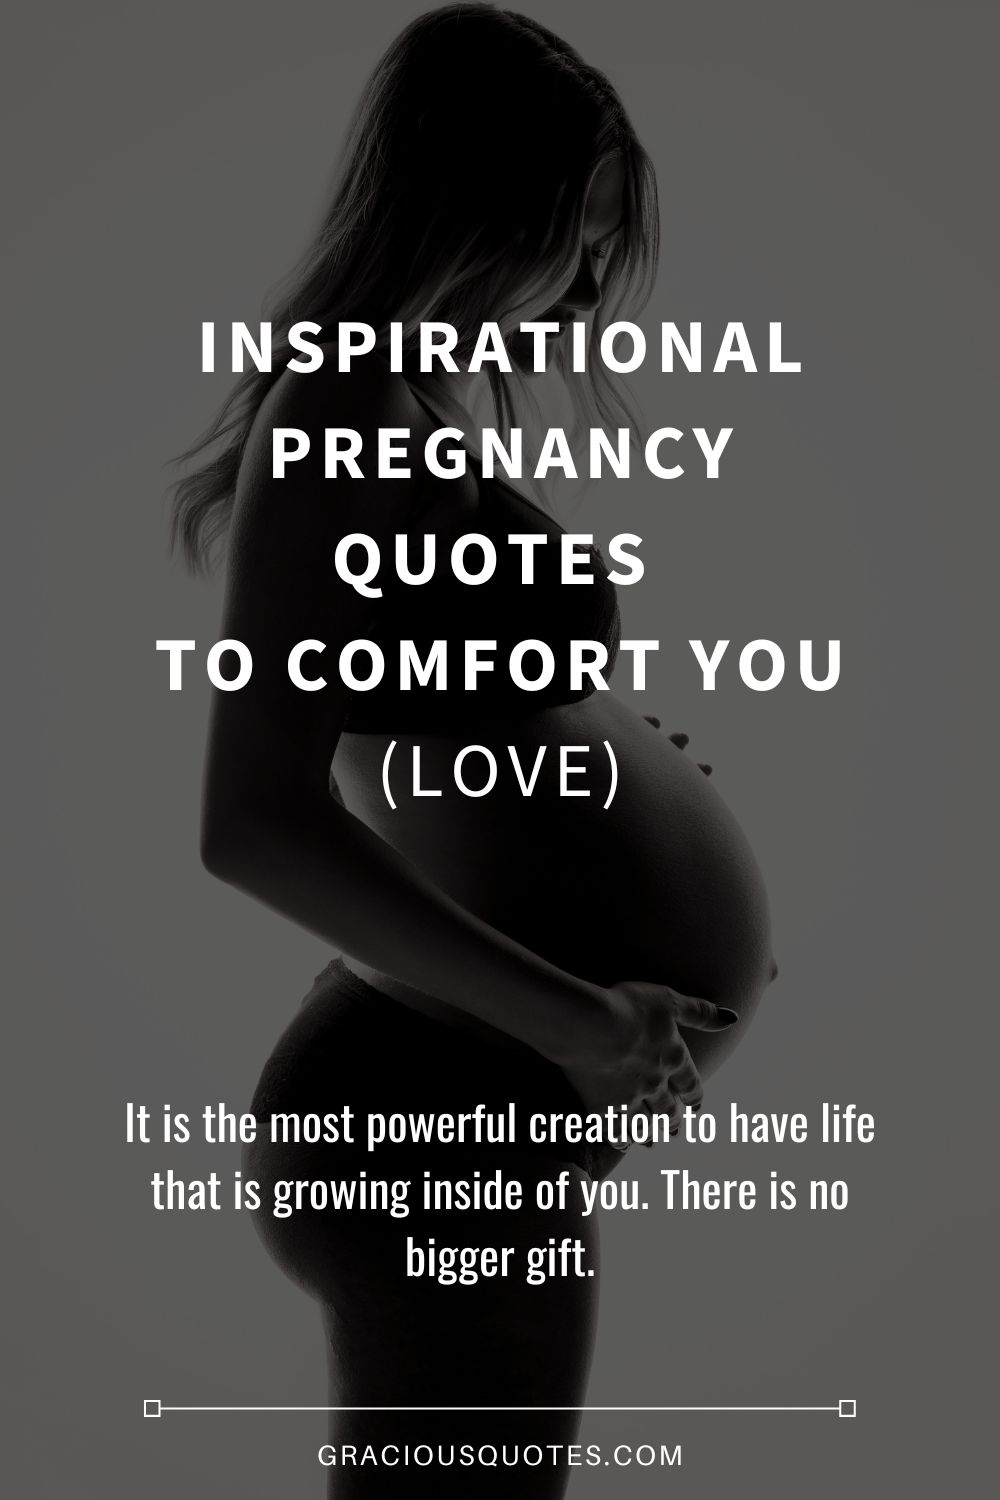 80 Inspirational Pregnancy Quotes to Comfort You (LOVE)